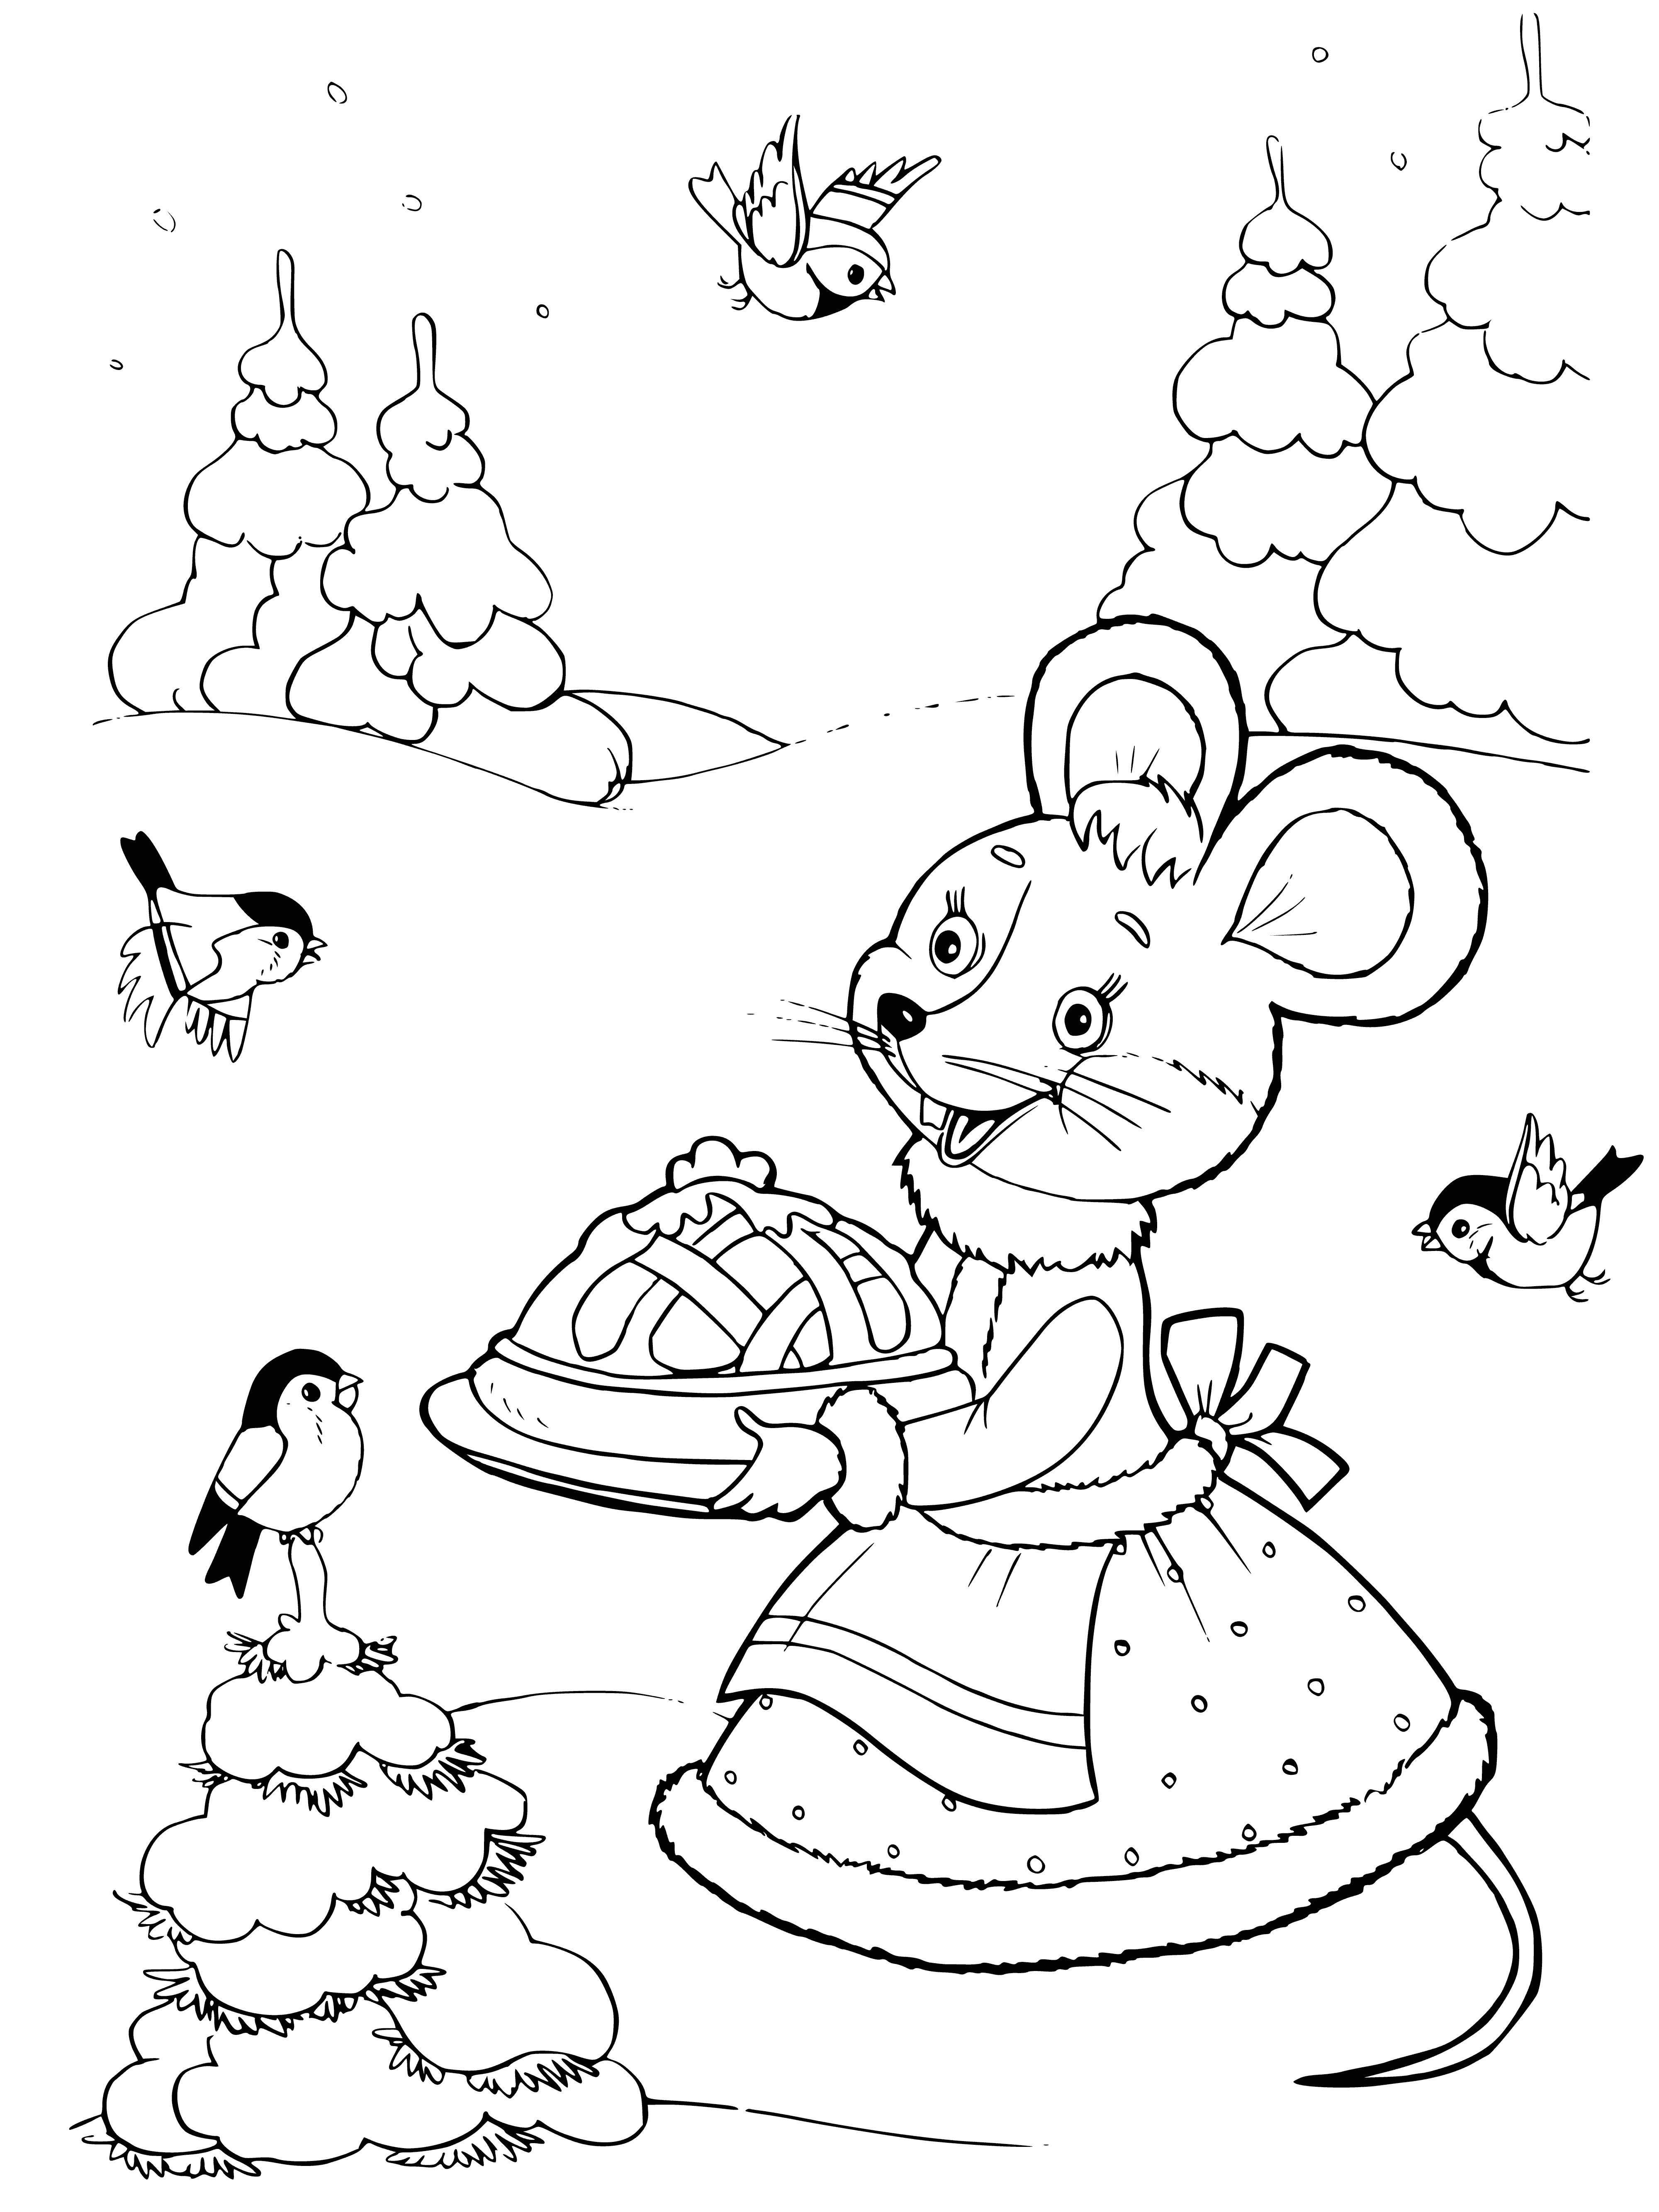 coloring page: Small brown rodent on log, standing guard in snow-covered forest. Beady black eyes scanning for danger; long tail and large ears.